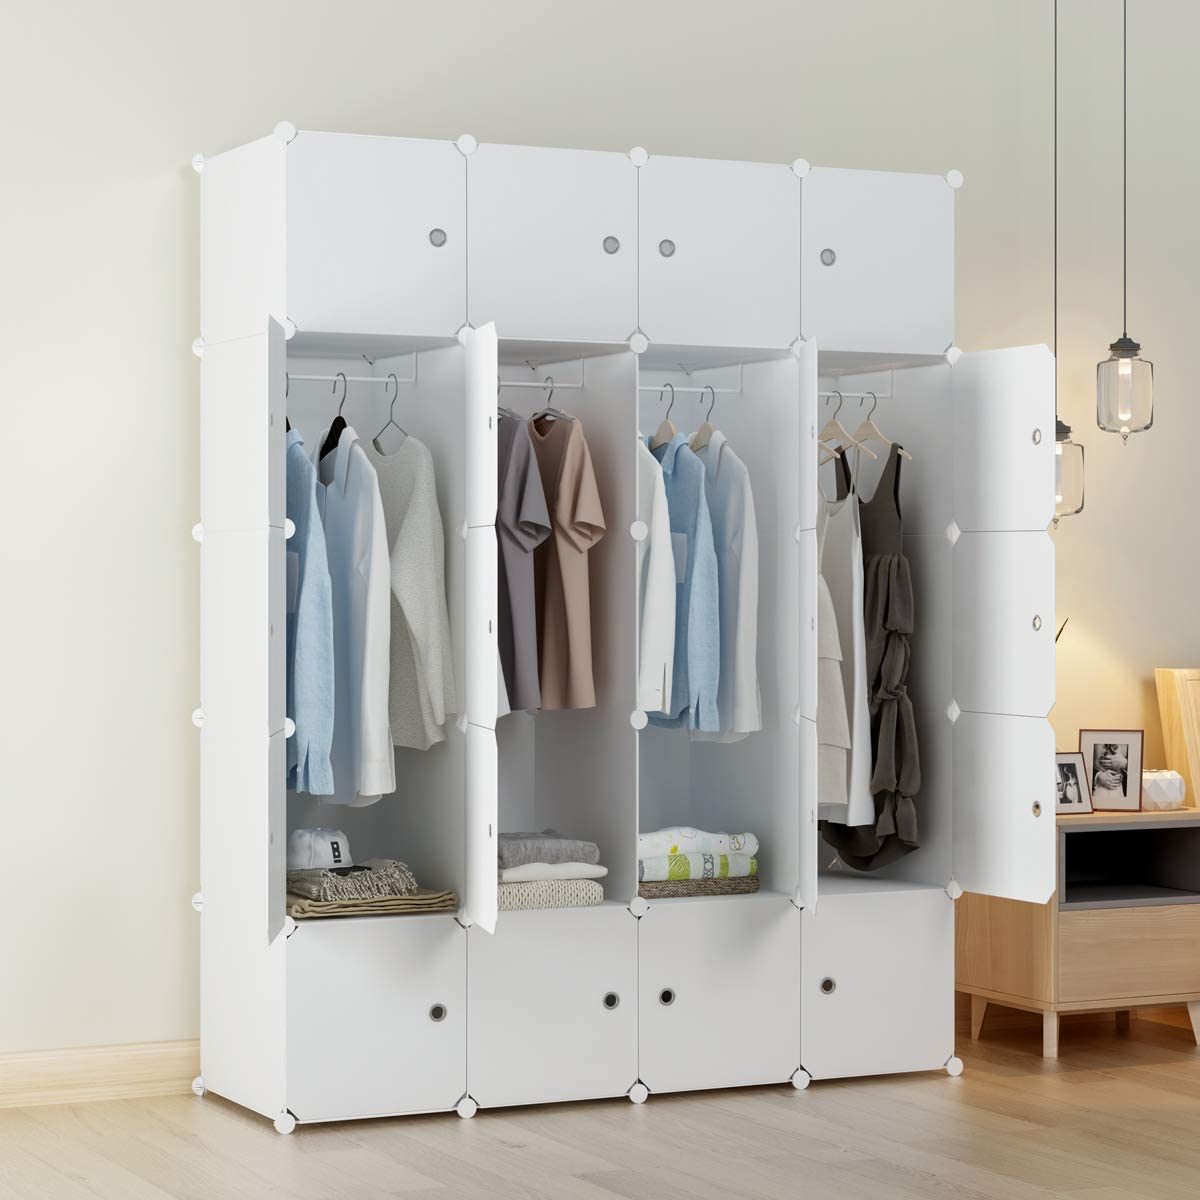 20 Cube Organizer Stackable Plastic Cube Storage Shelves Design Multifunctional Modular Closet Cabinet with Hanging Rod RT